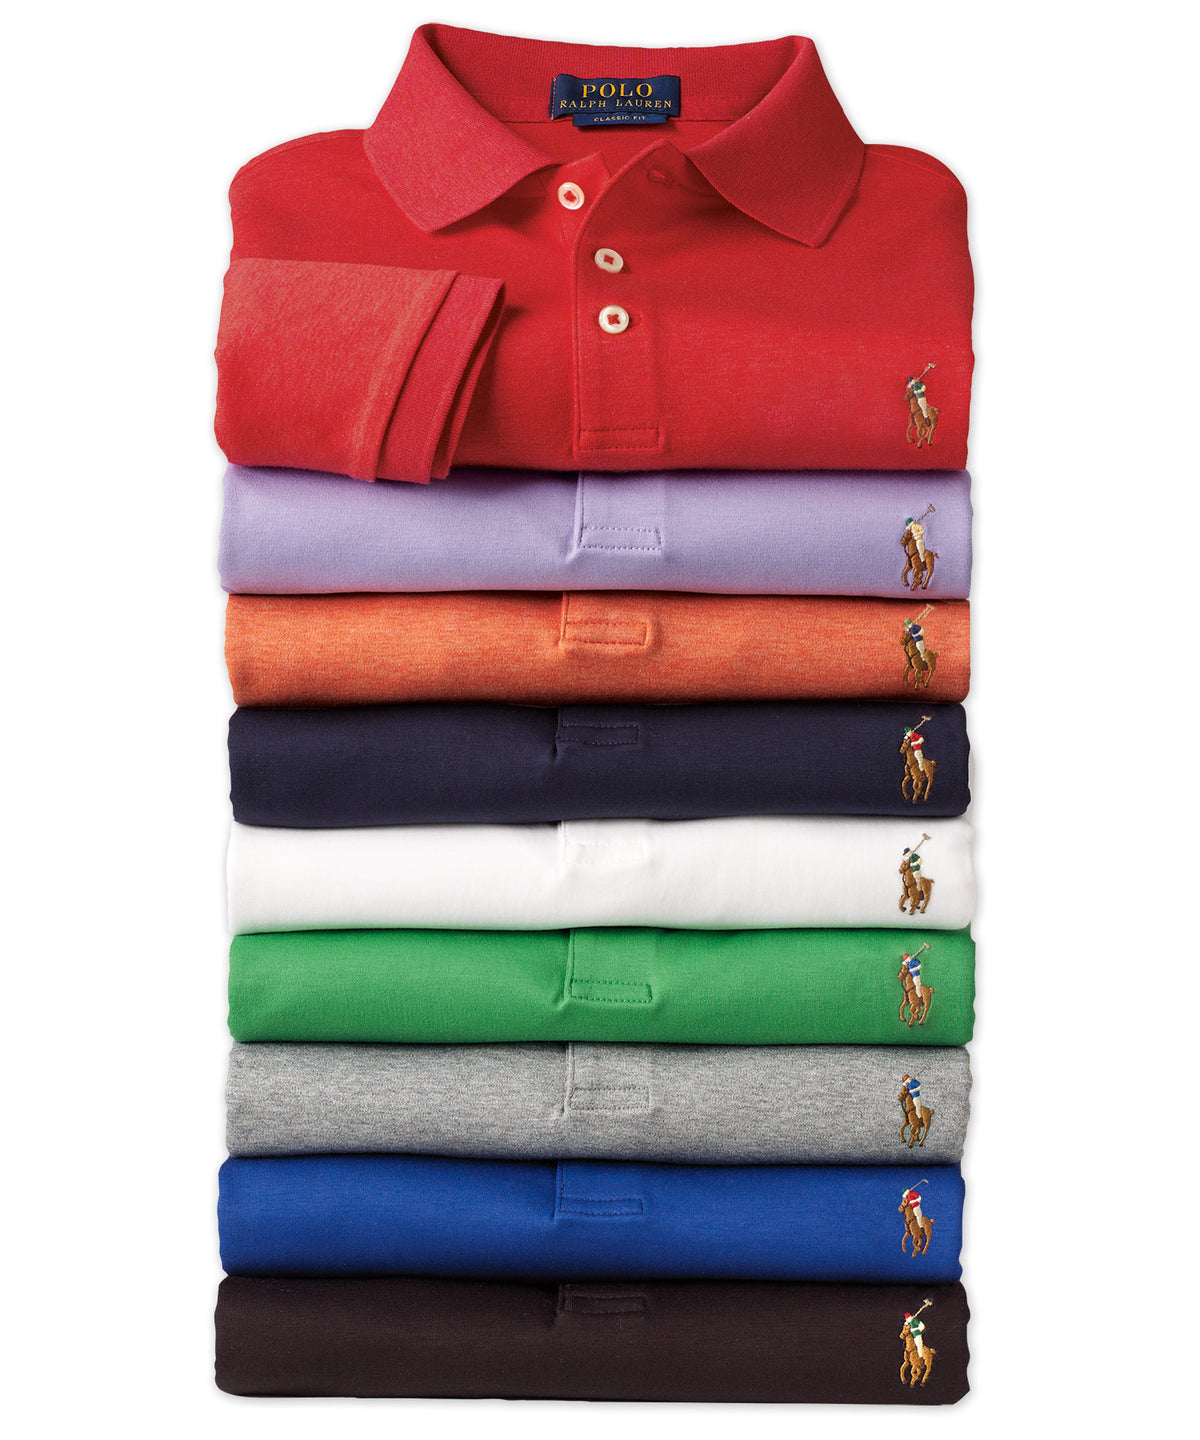 The new season and collection Polo Ralph Lauren.